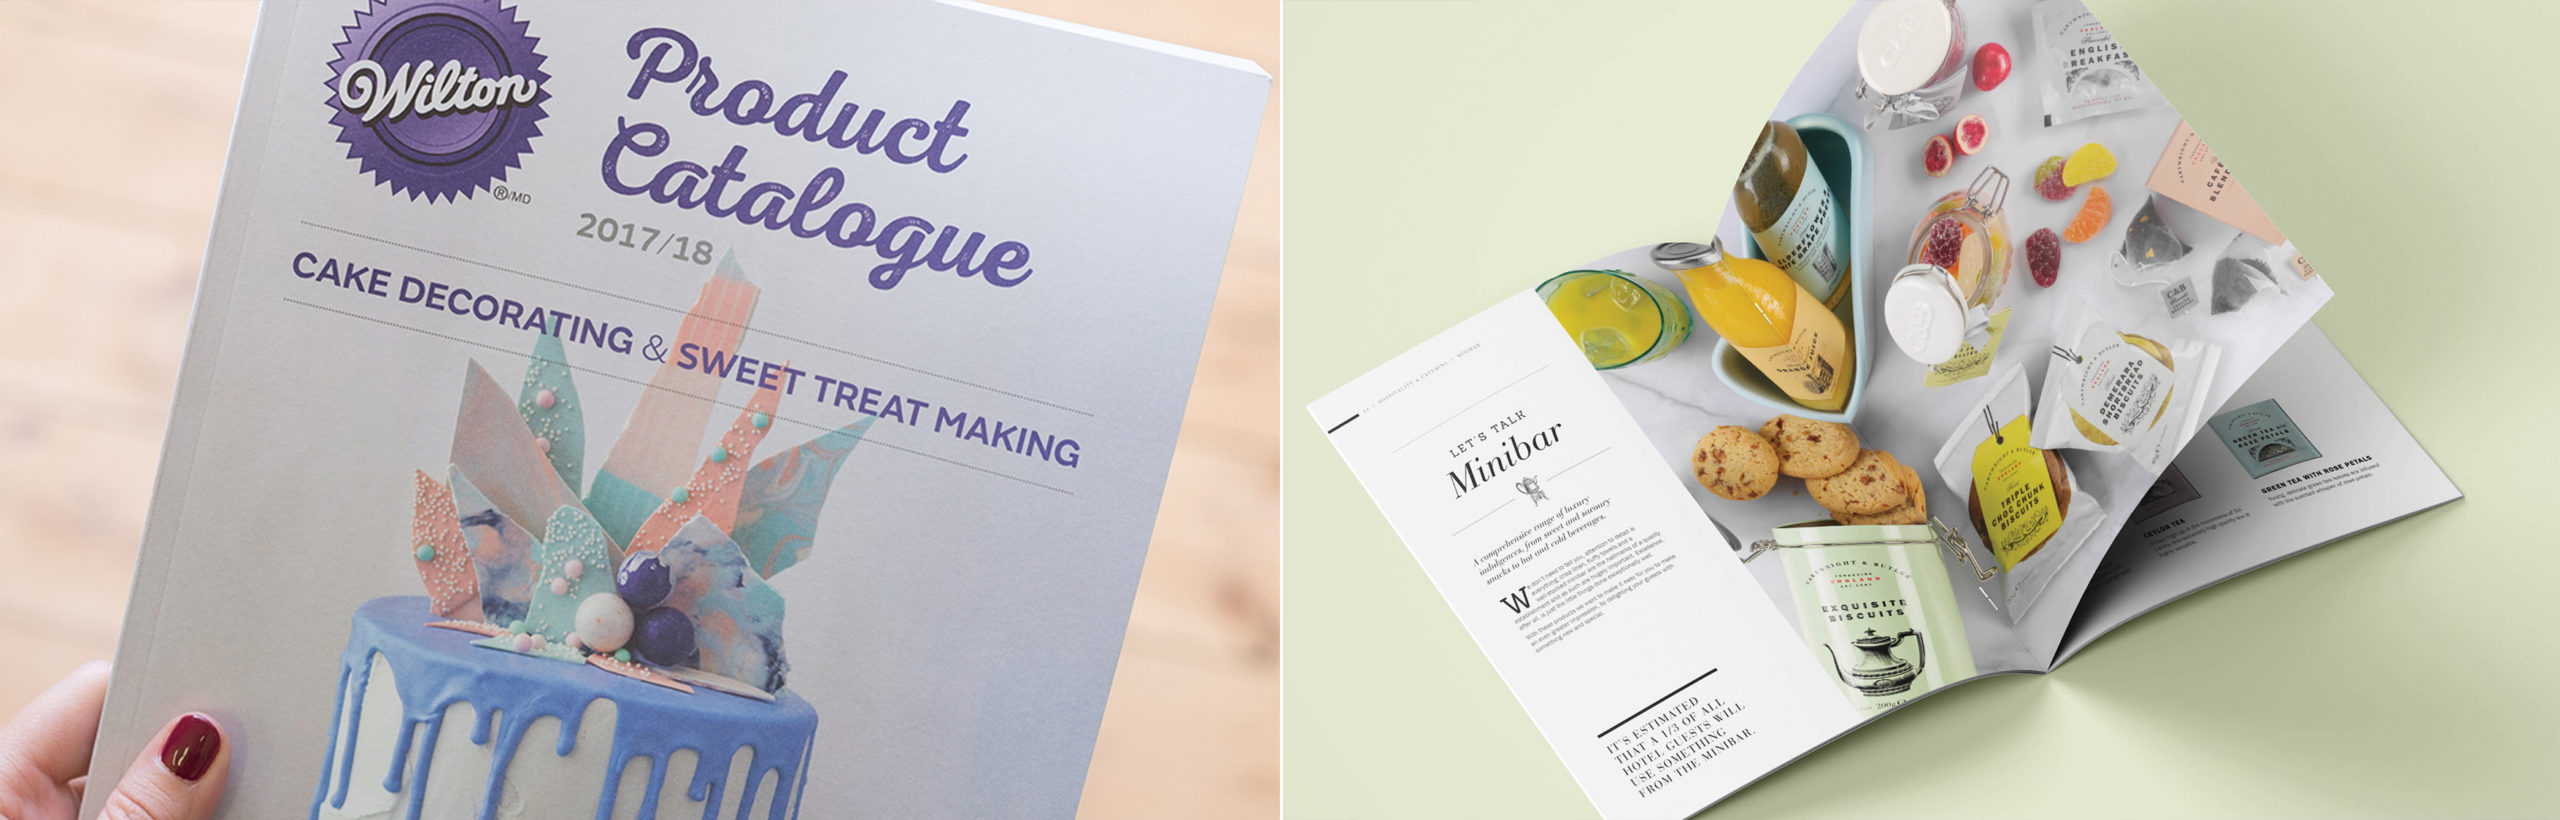 Print Design Services for Food & Drink businesses by Toast Food